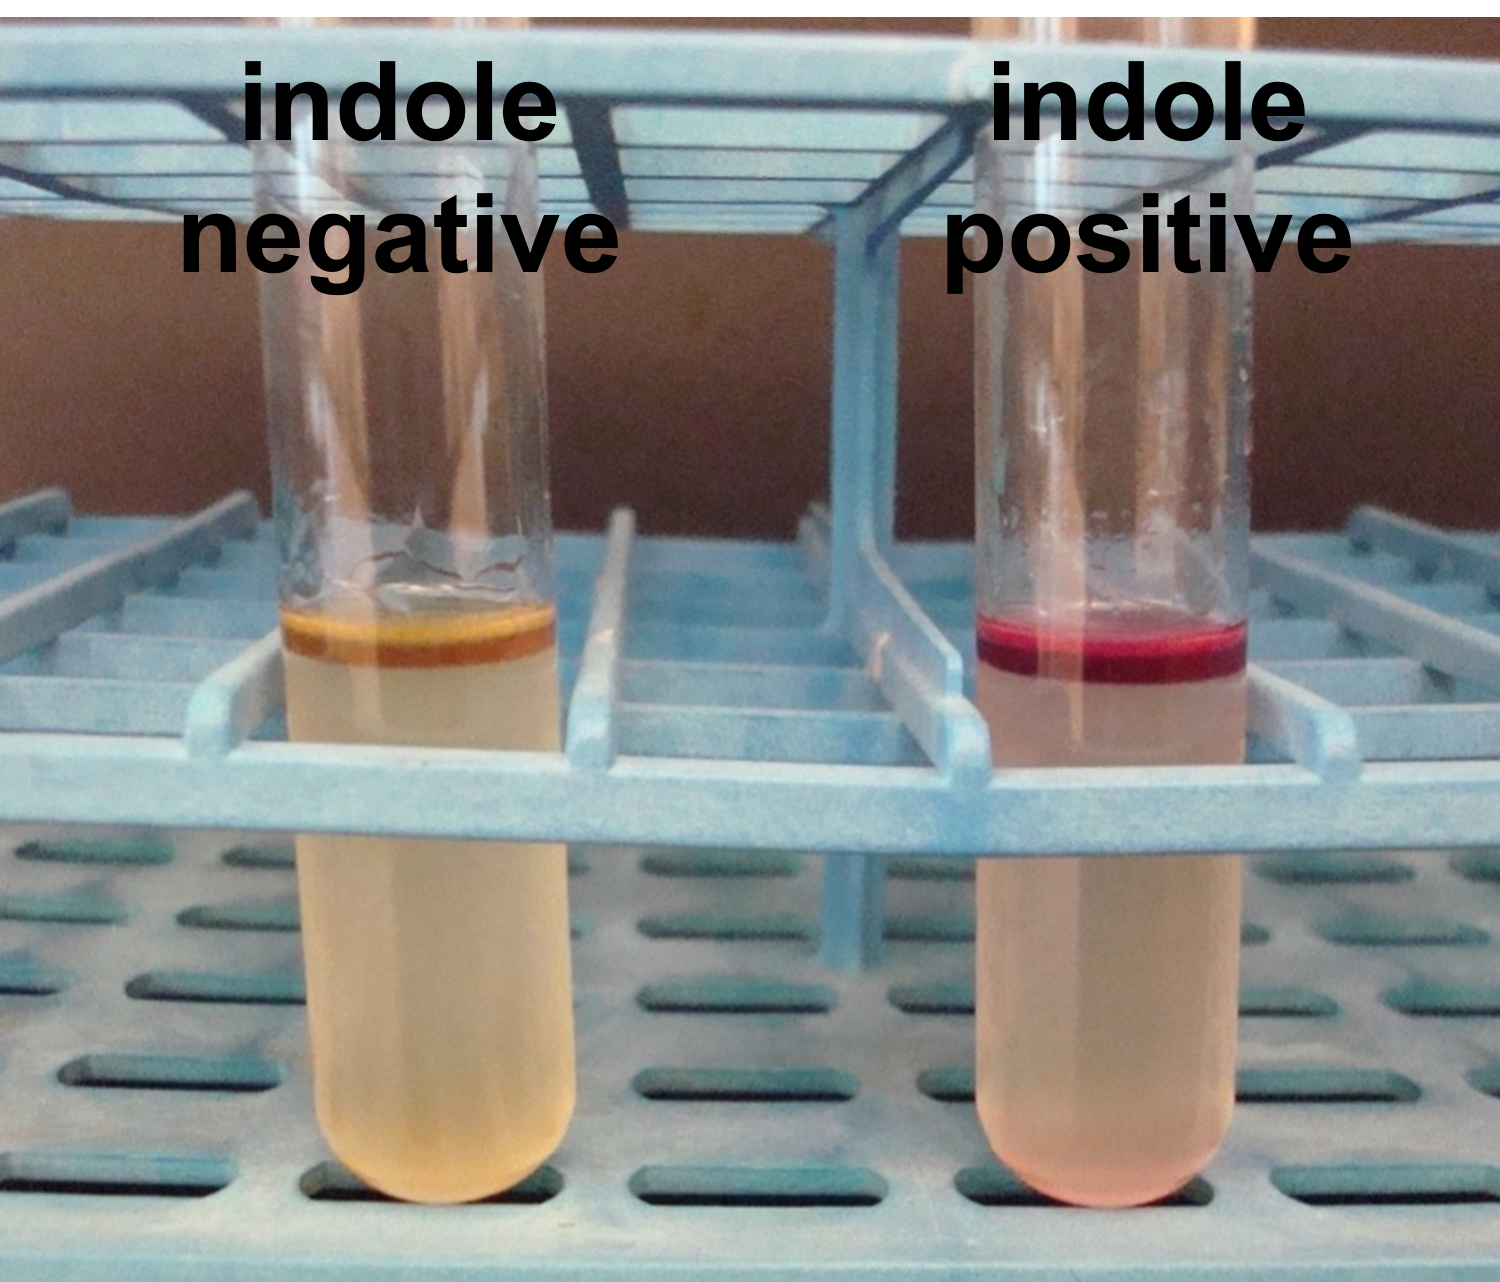 indole test results labeled